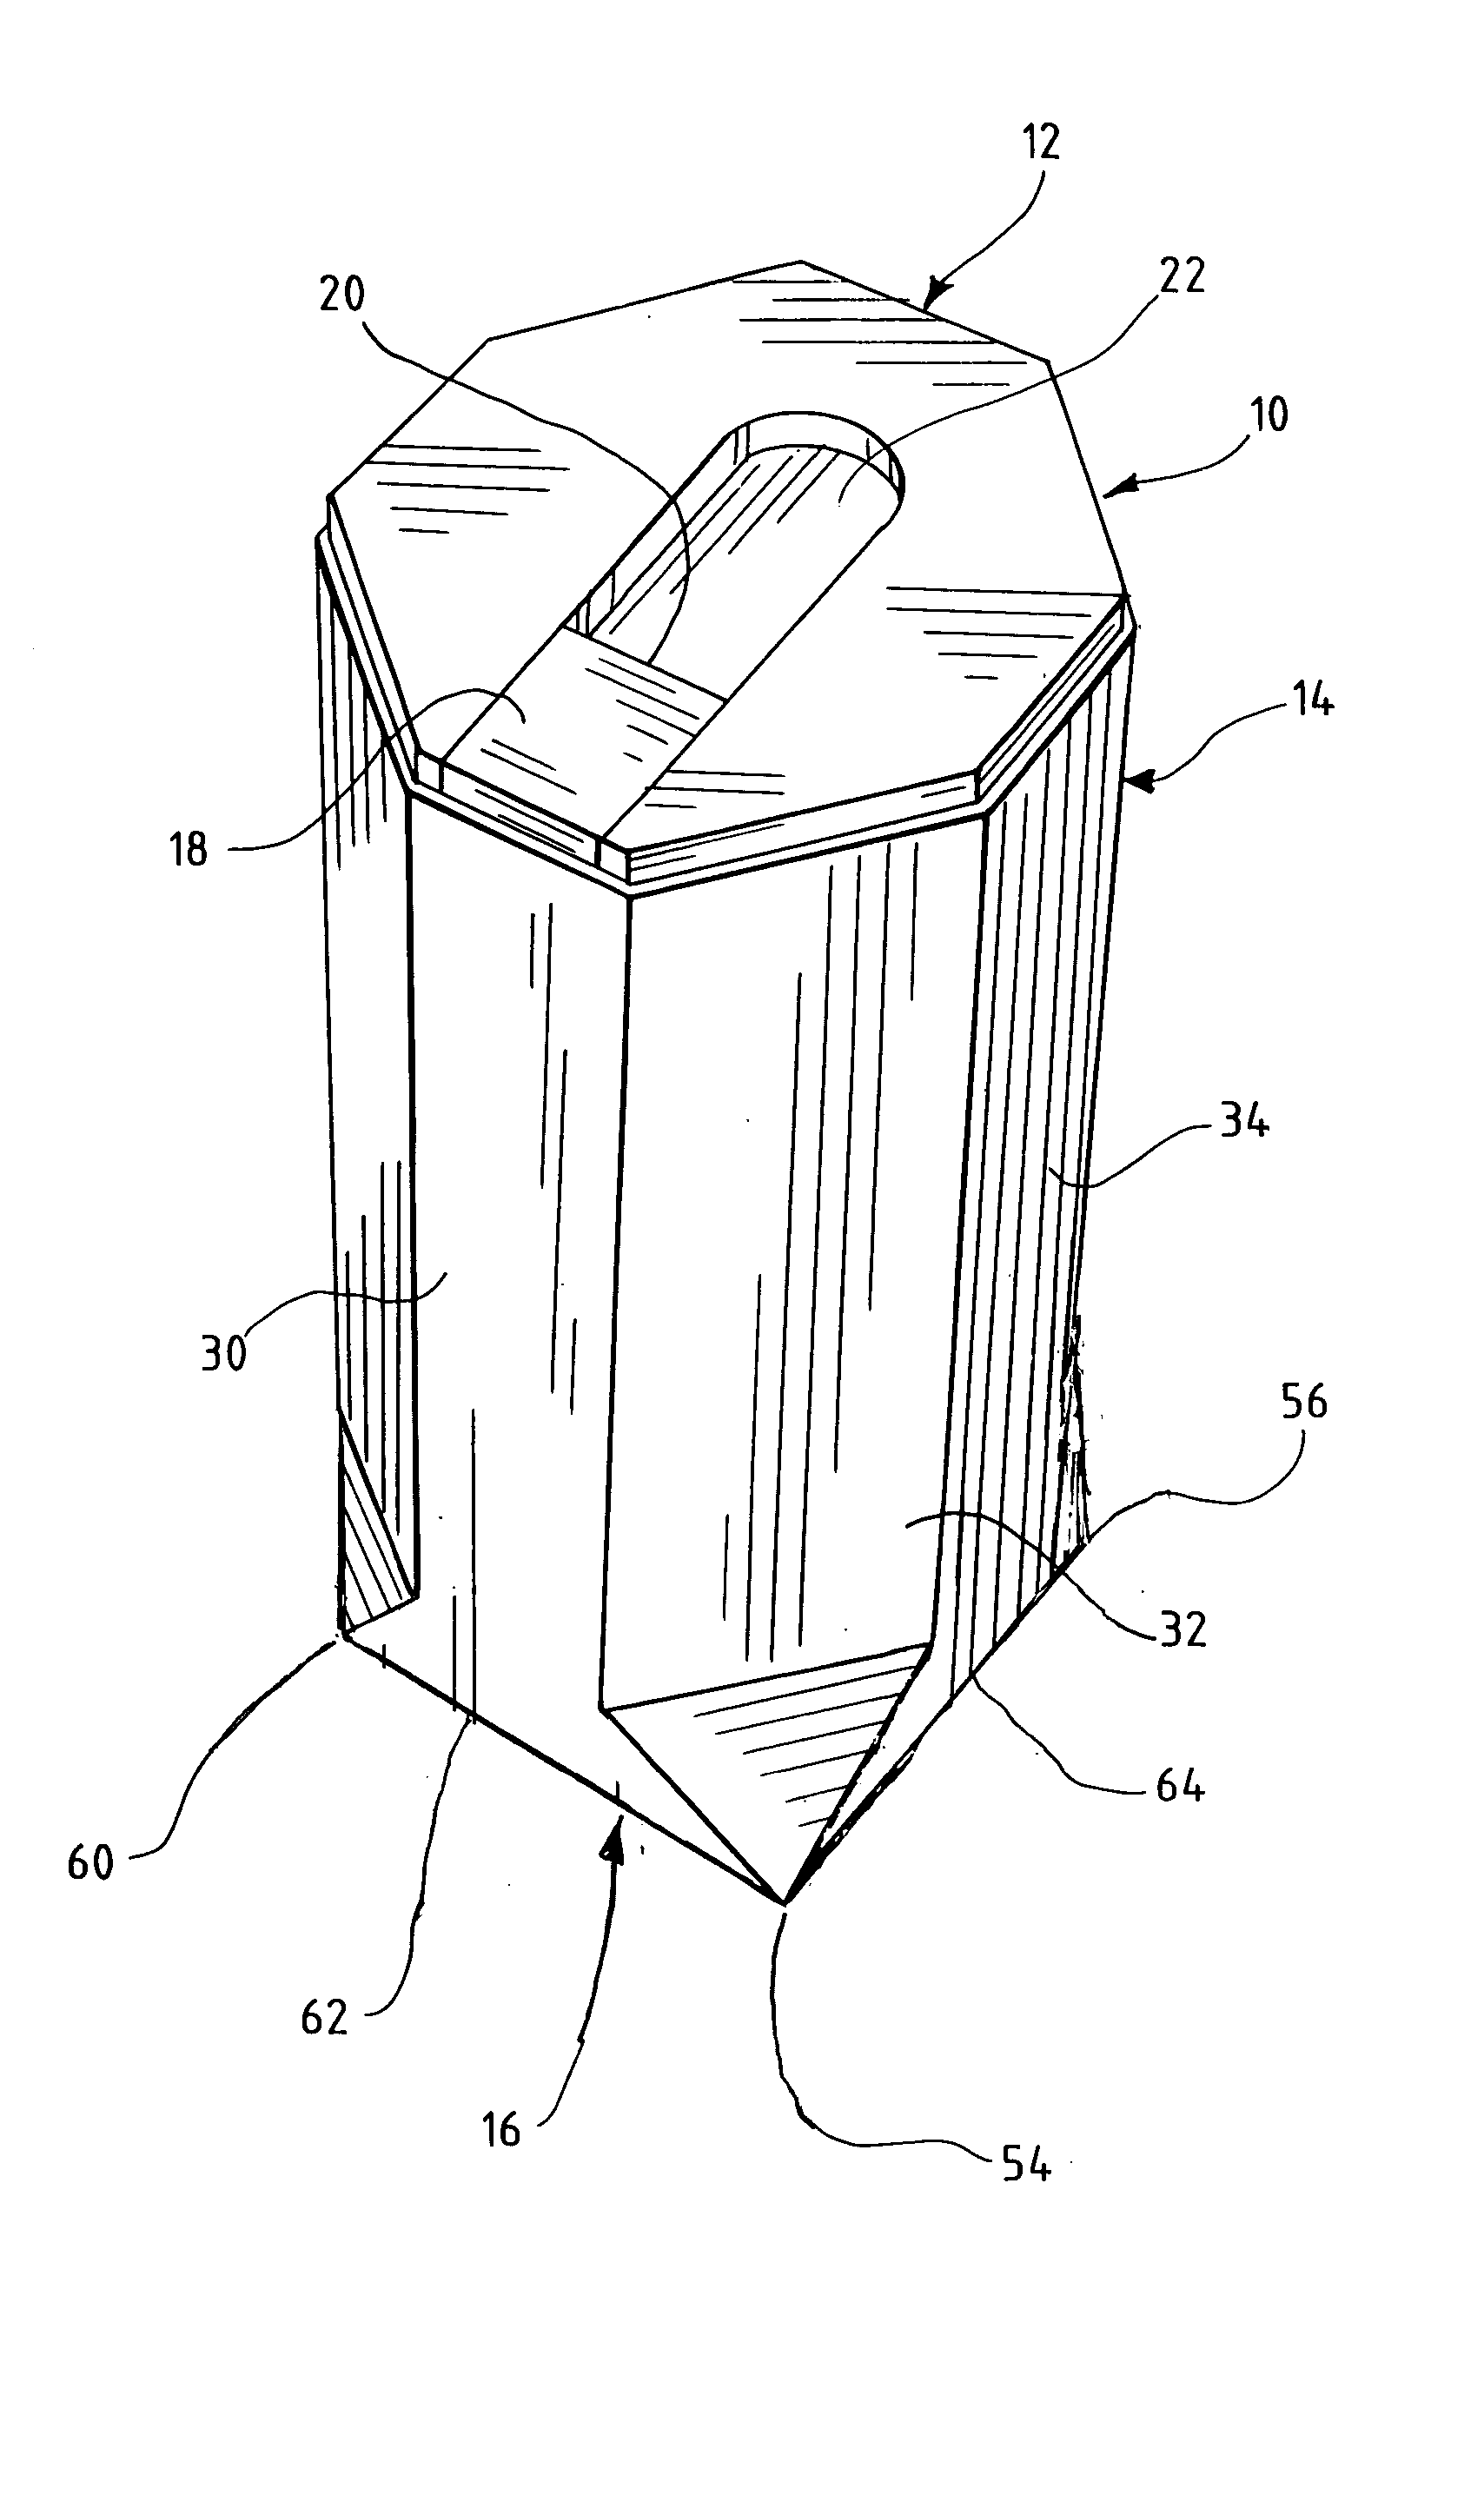 Multi-sided package with easily openable lid